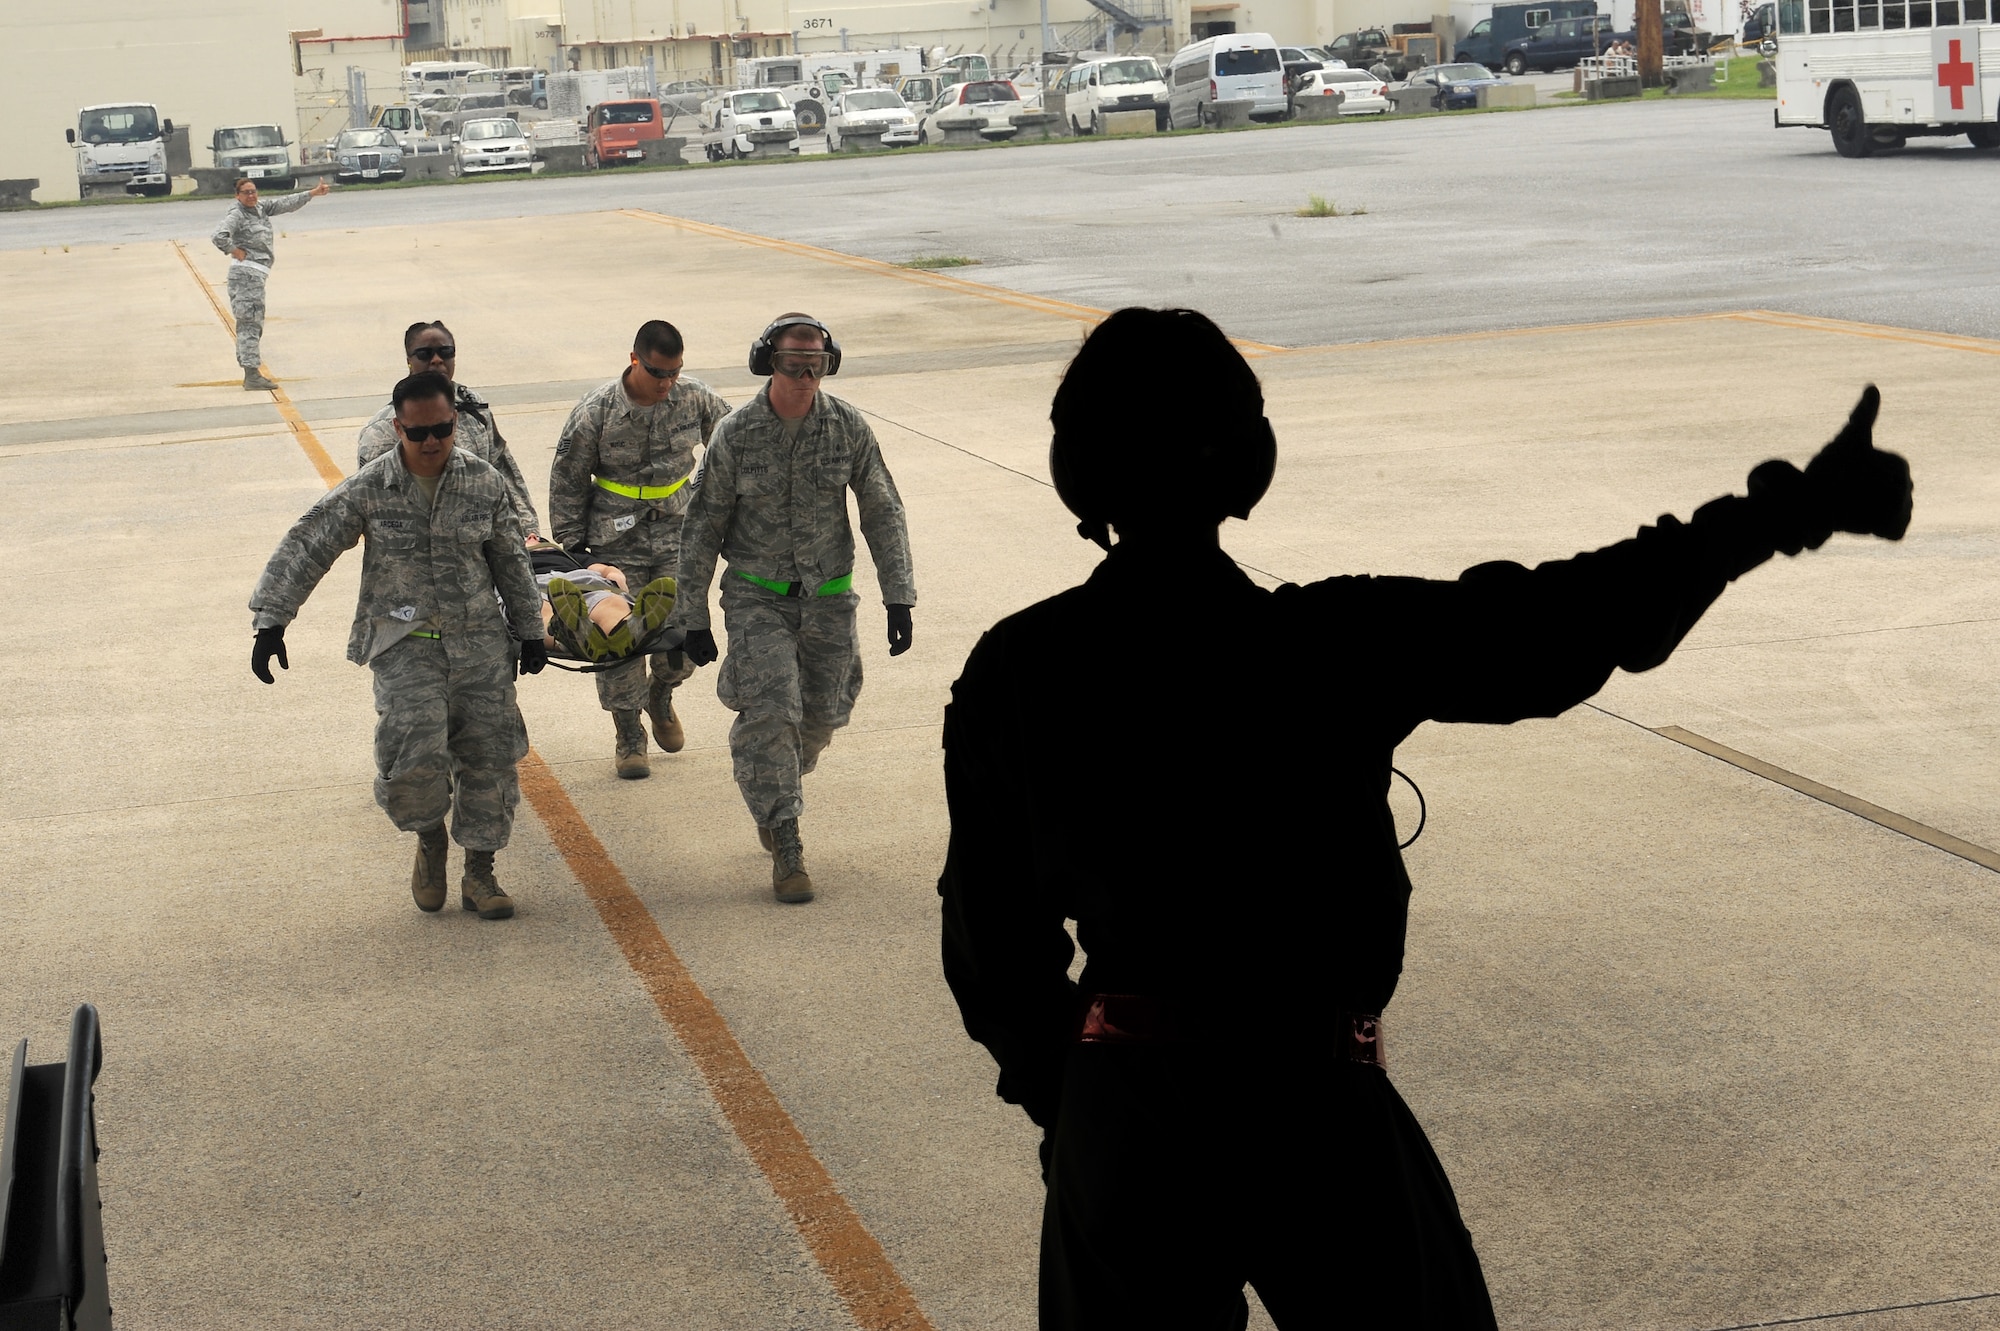 U.S. Air Force Capt. Tracie Coy, 8th Aeromedical Evacuation Squadron nurse, directs a team from the 18th Medical Group carrying a simulated patient into a C-130 on Kadena Air Base, Japan, Aug. 18, 2015. Coy, who is assigned to Misawa Air Base, was at Kadena participating in an En-Route Patient Staging System exercise, which simulated a situation necessitating the evacuation of injured personnel from Kadena Air Base. (U.S. Air Force photo by Airman 1st Class Zade C. Vadnais)